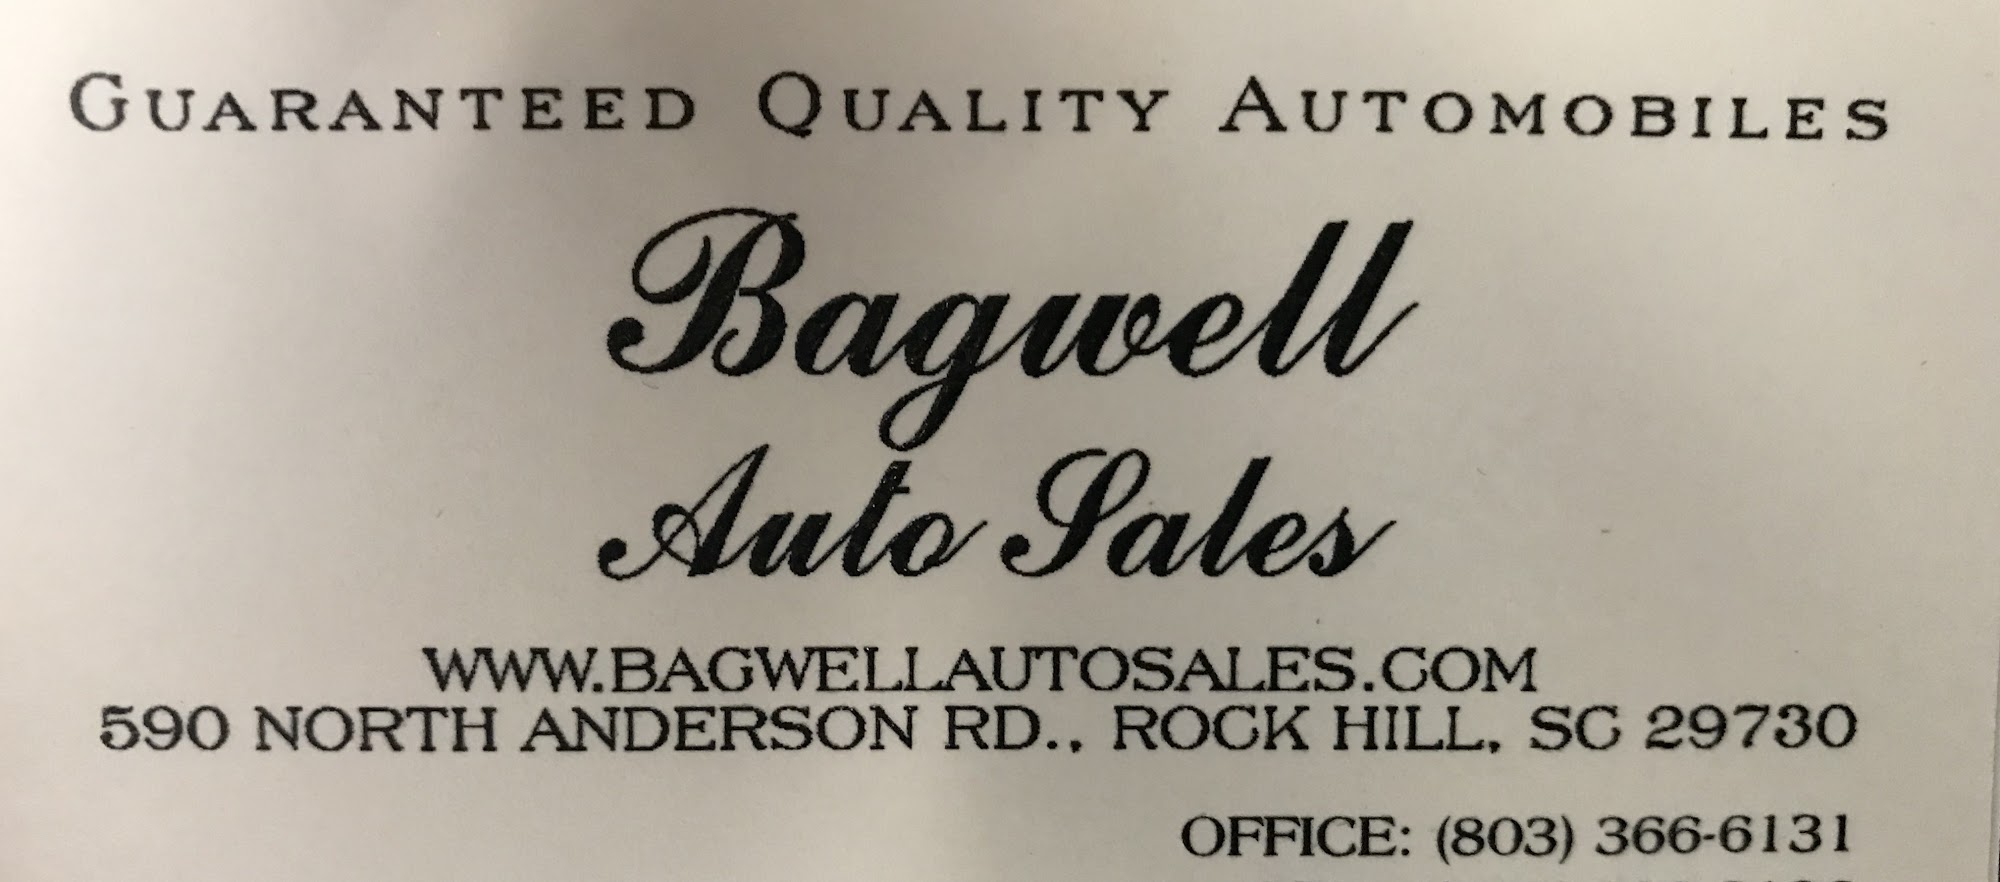 Bagwell Auto Sales